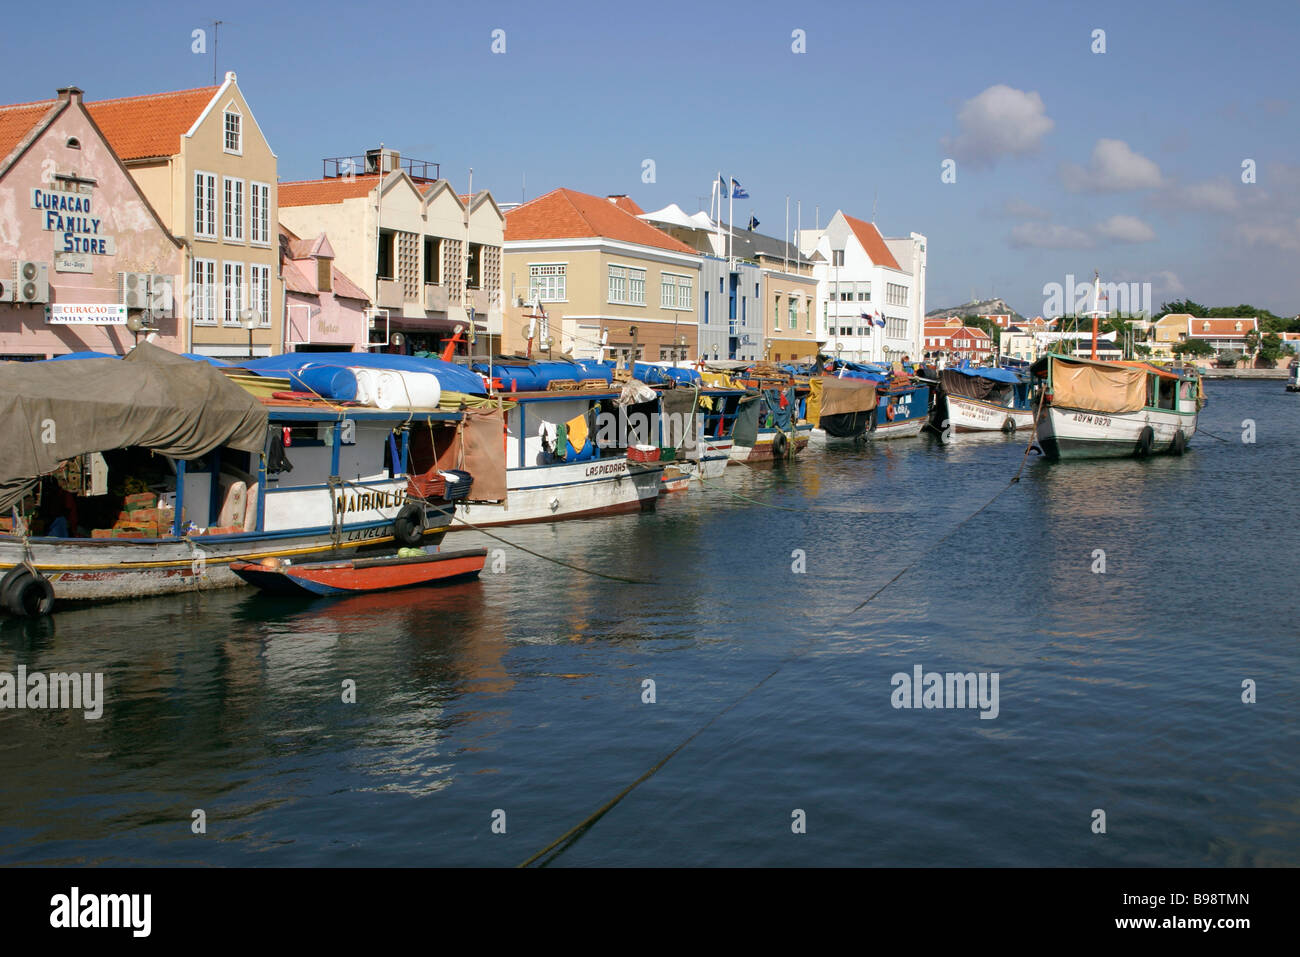 Dutch Antilles Capital Harbour wall Quayside Historic houses Floating market Stall Boats laden with goods  WILLEMSTAD CURACAO Stock Photo